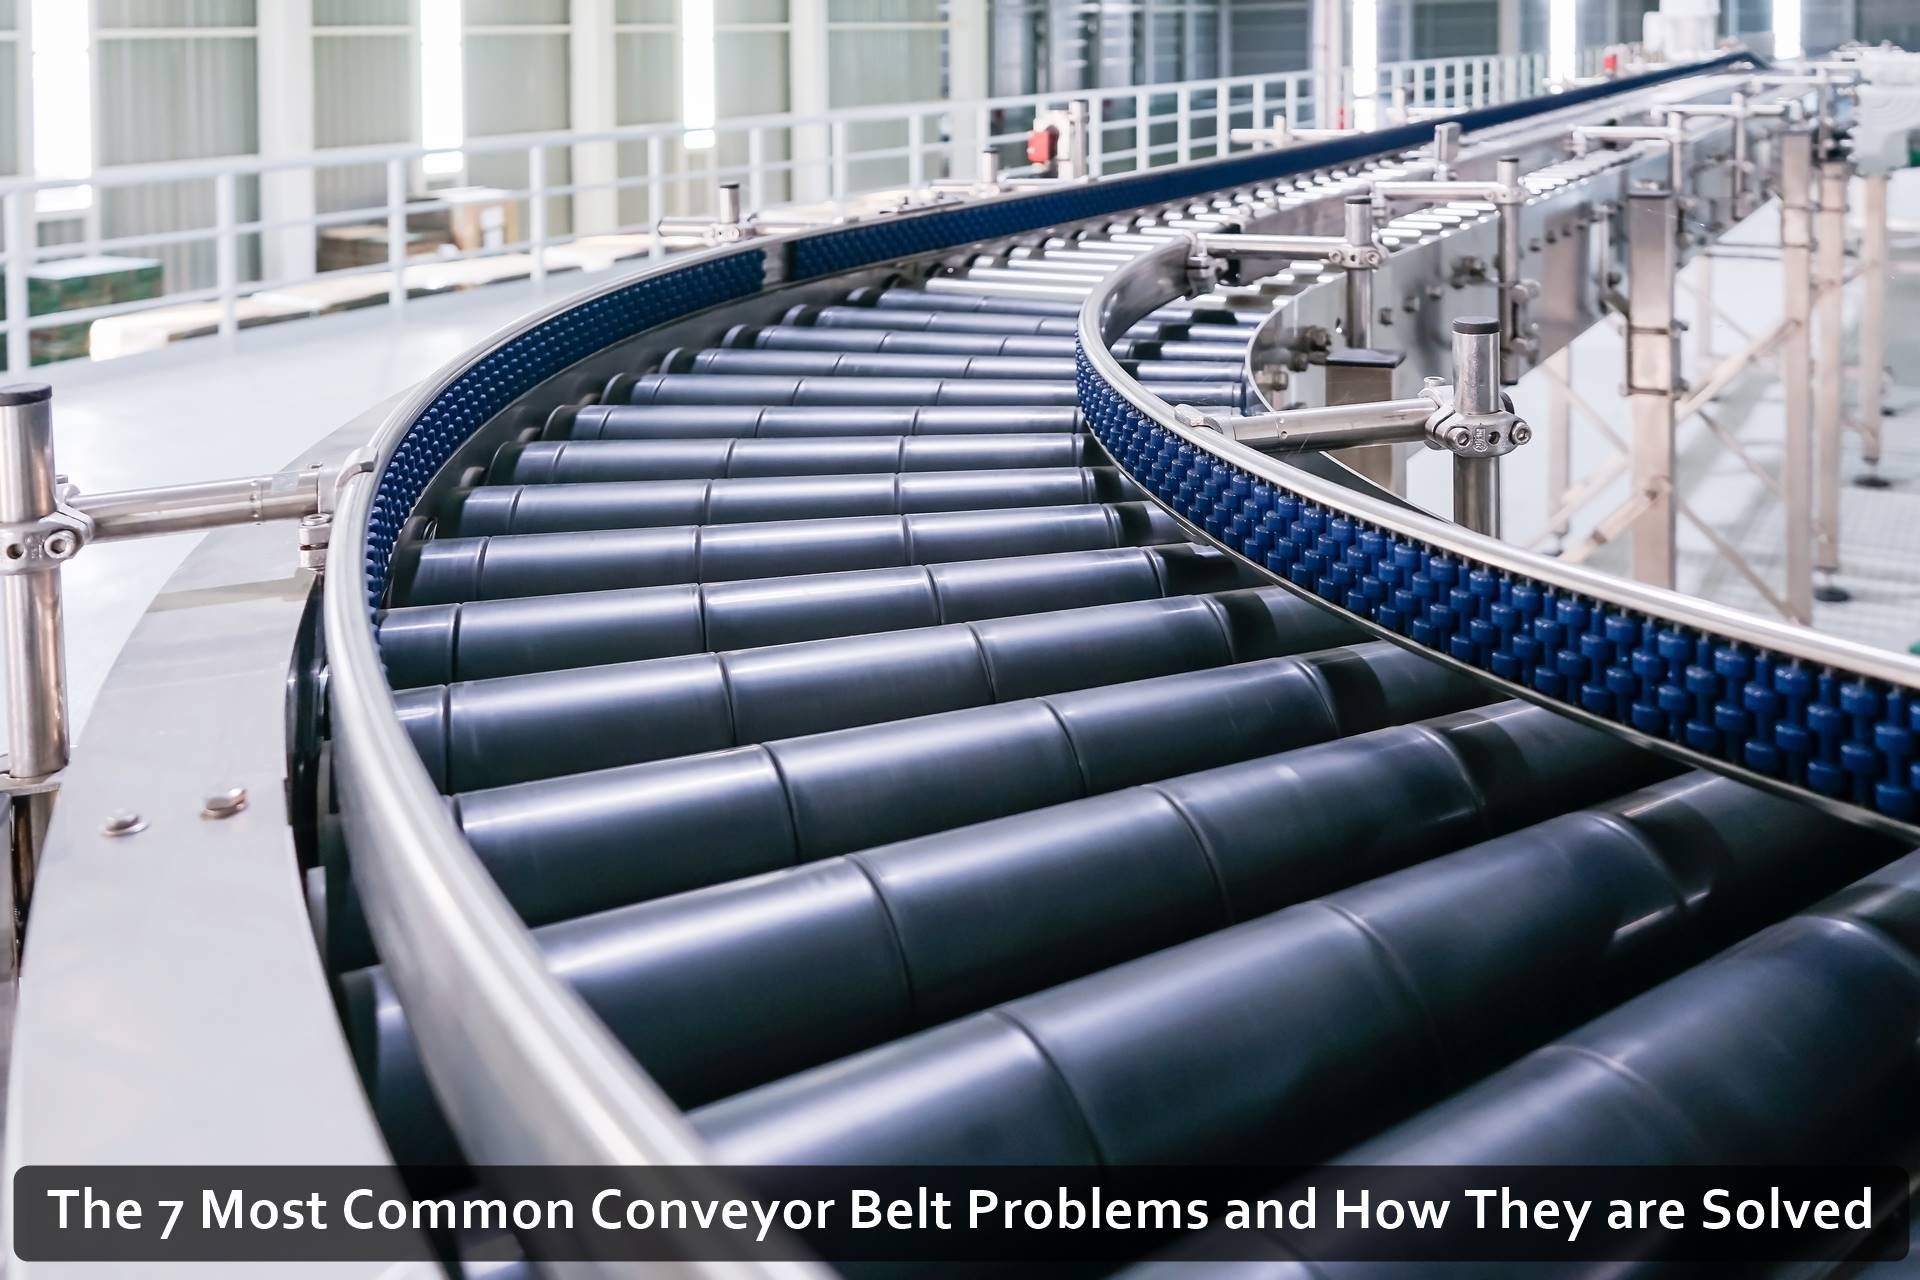 The 7 Most Common Conveyor Belt Problems and How They are Solved